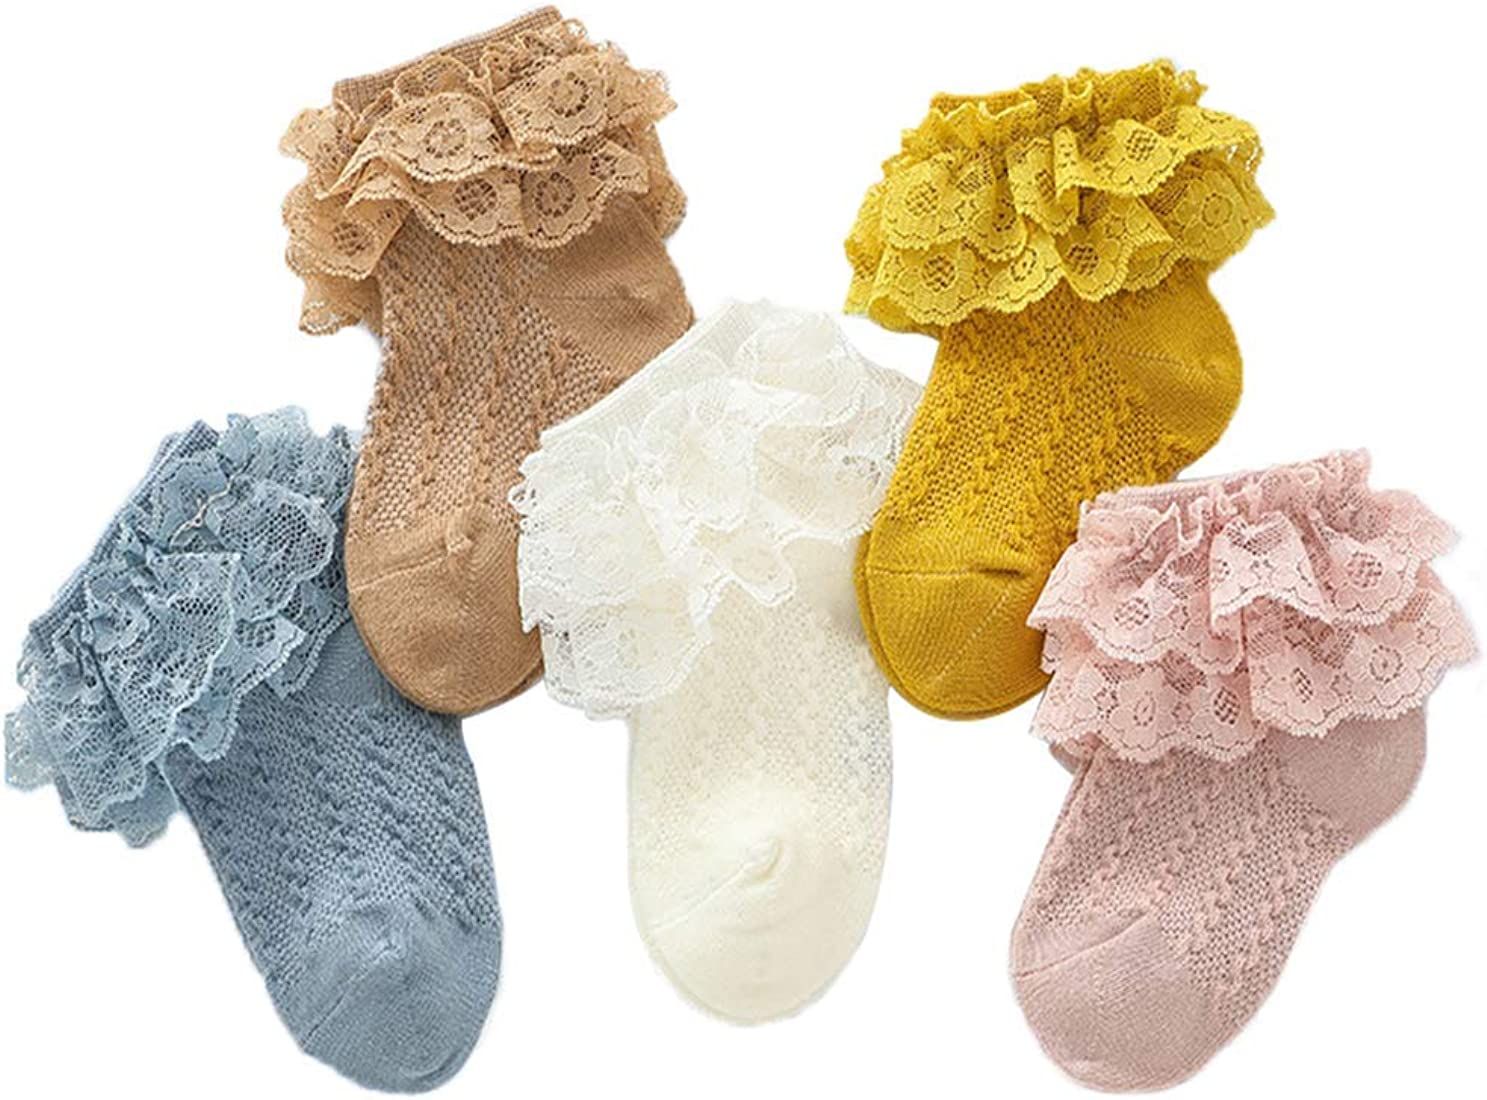 Adeimoo Princess Newborn Baby Girls Socks Lace Ruffle Frilly Ankle Dress Sock for Infants Toddler | Amazon (US)